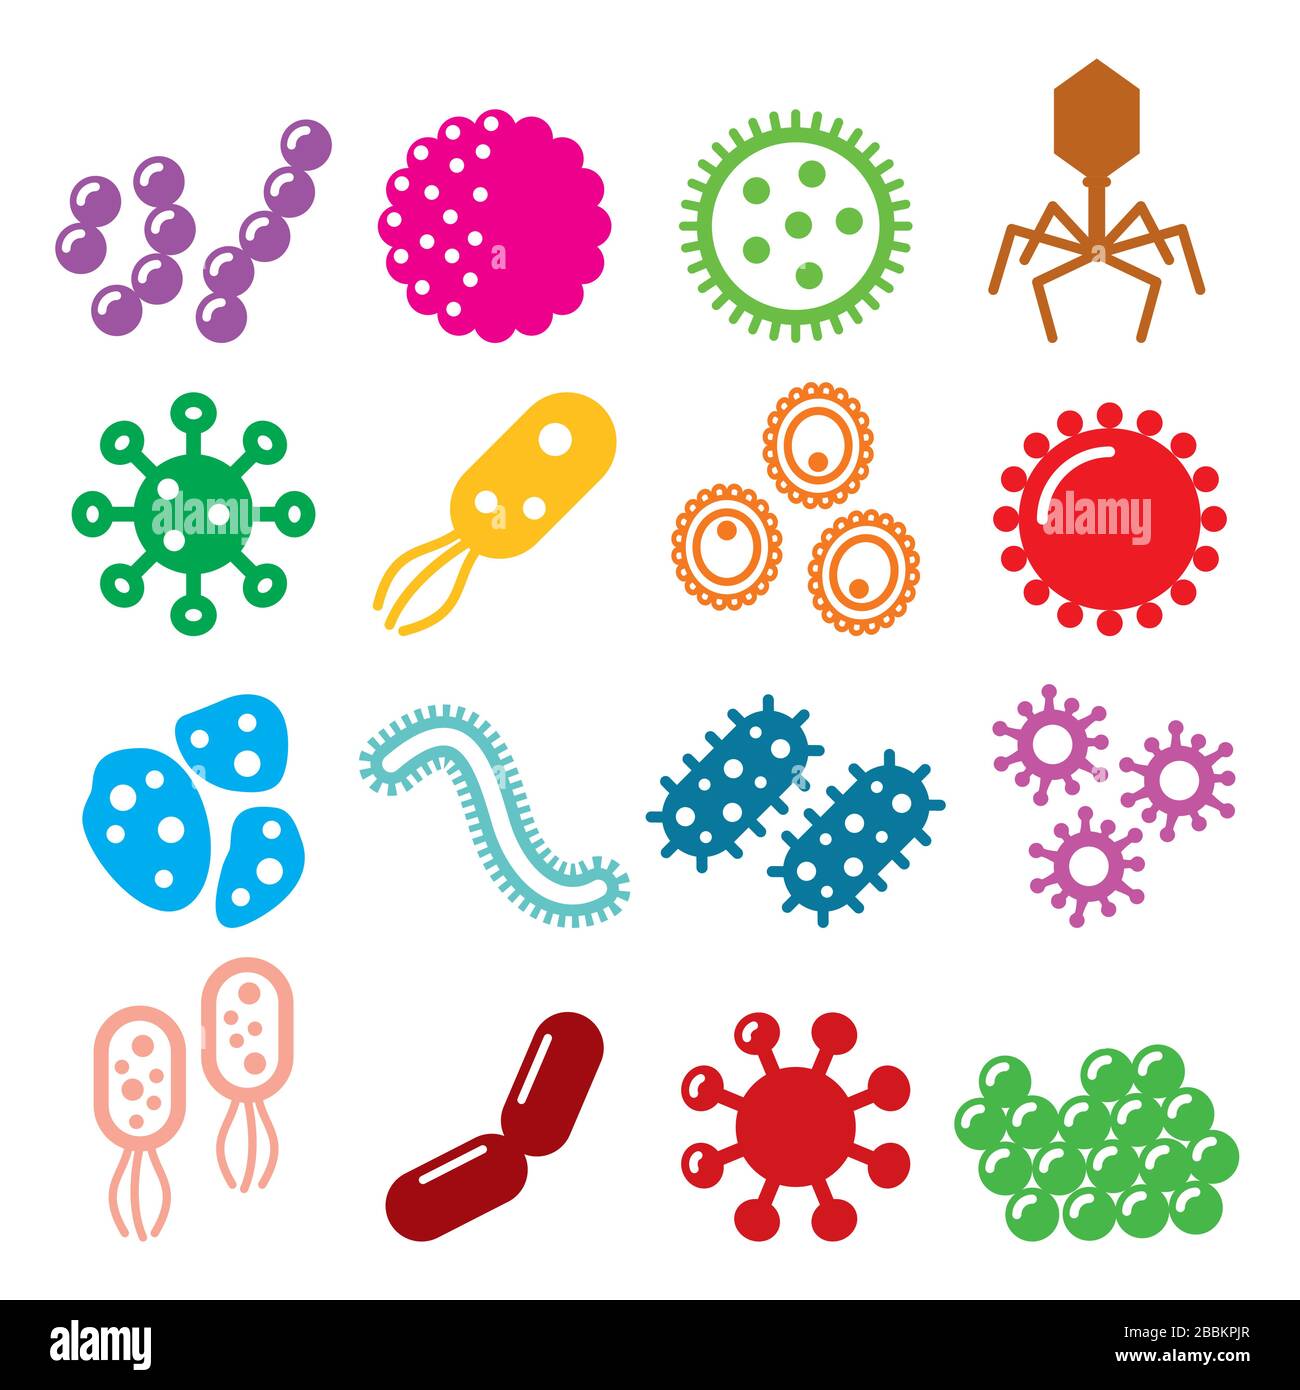 Virus, bacteria, superbug vector icons set - pandemic or epidemic concept, virus icon collection Stock Vector